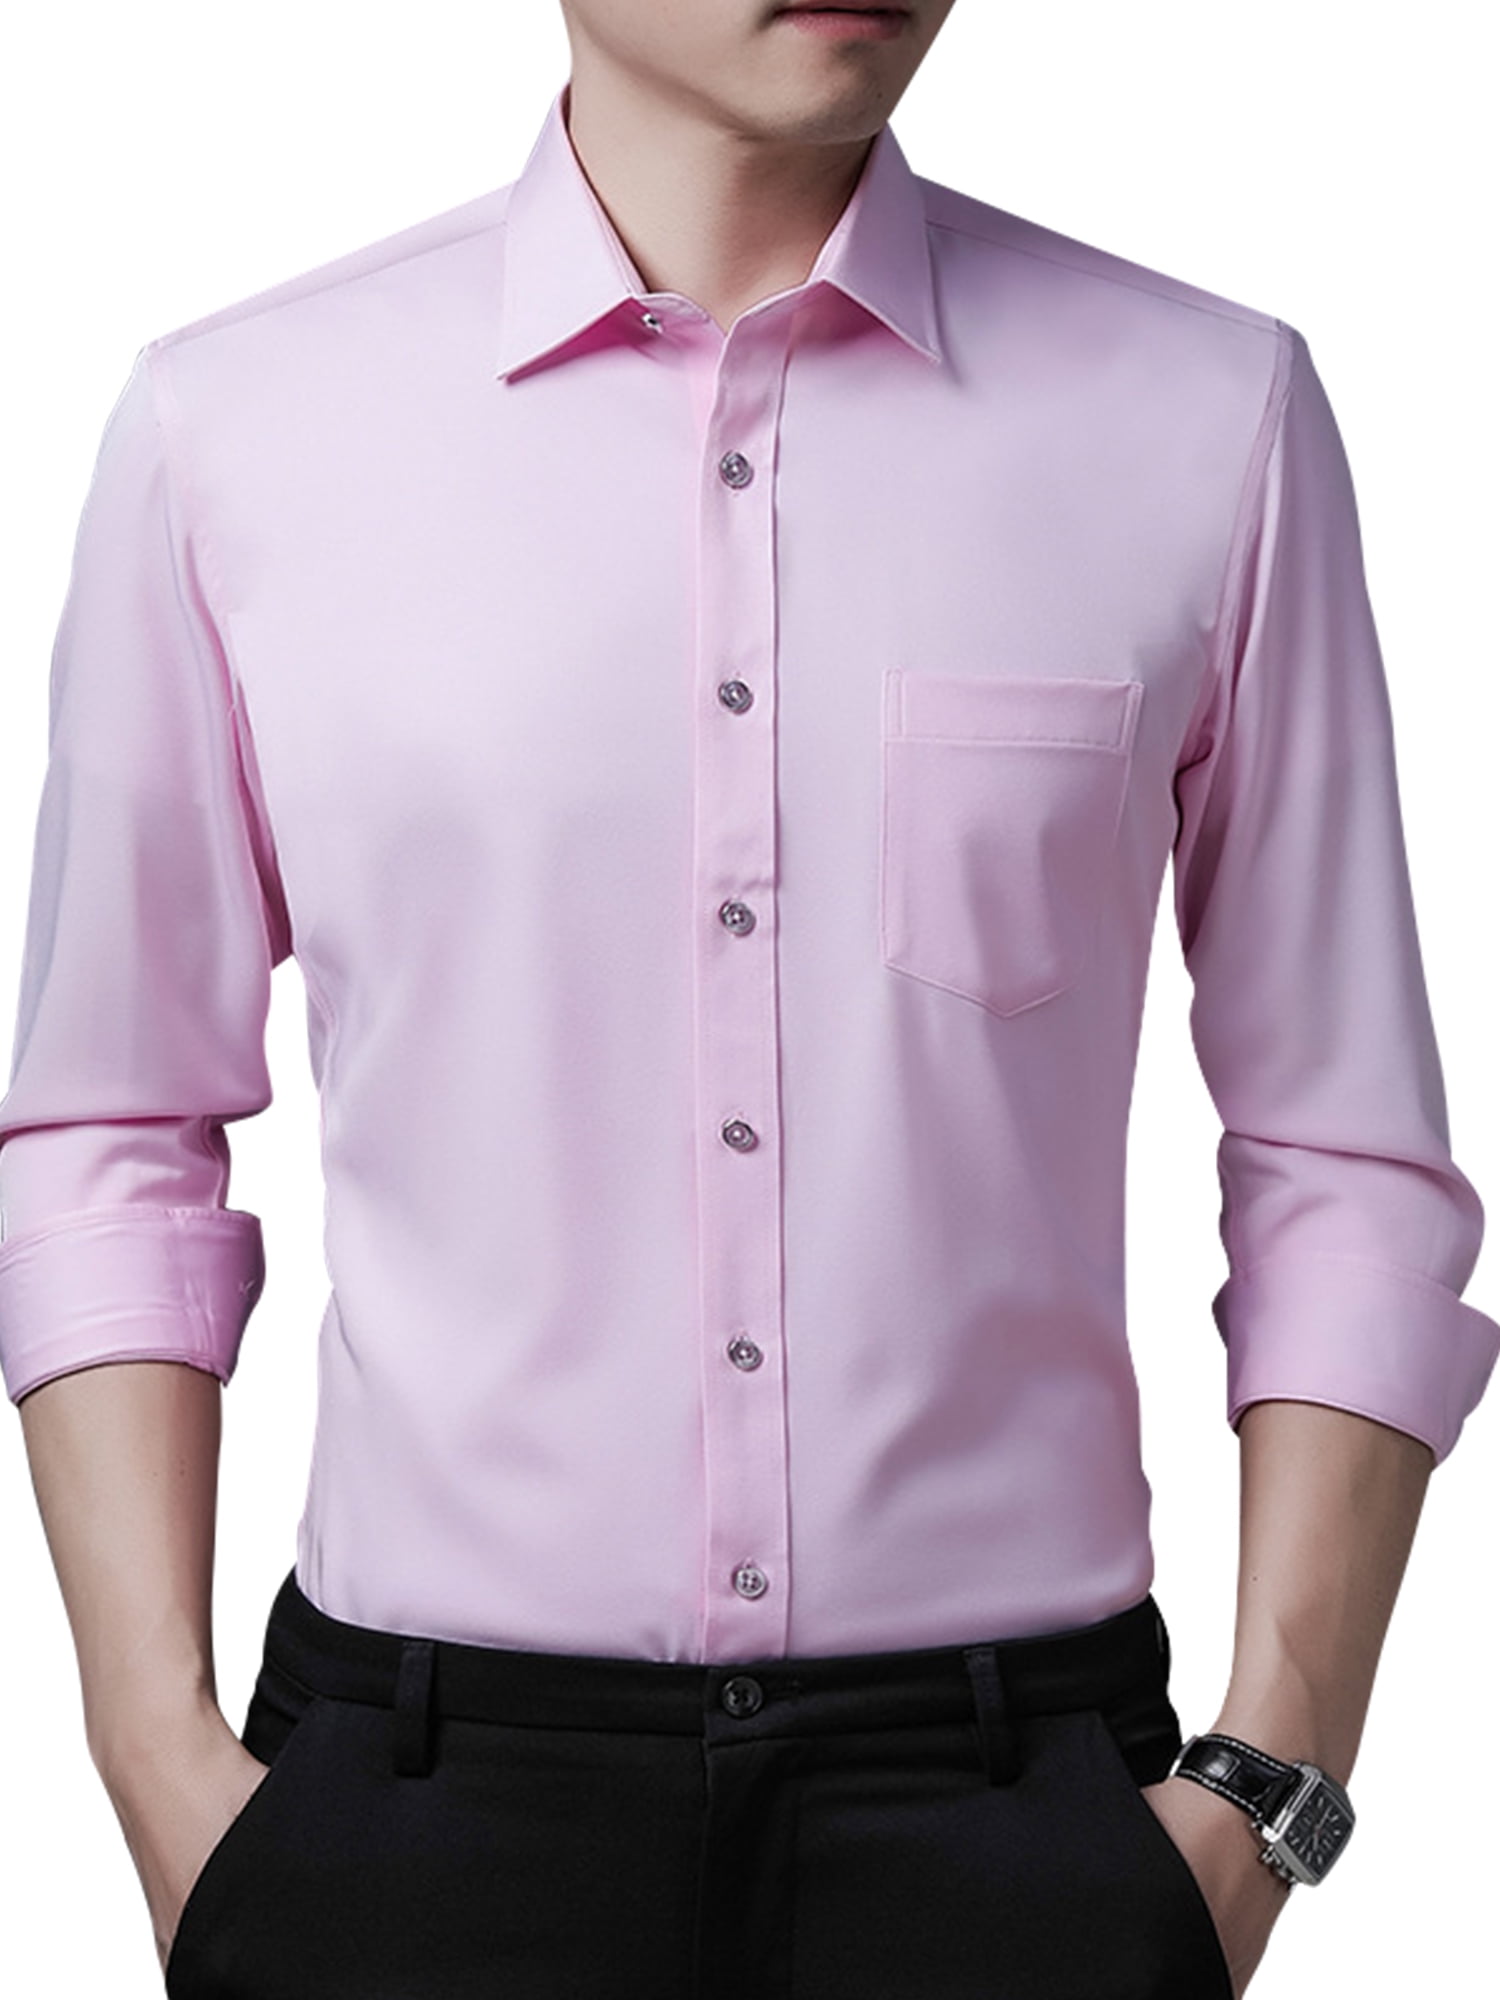 Sweatwater Mens Long Sleeve Button Front Casual Print Slim Fit Shirts